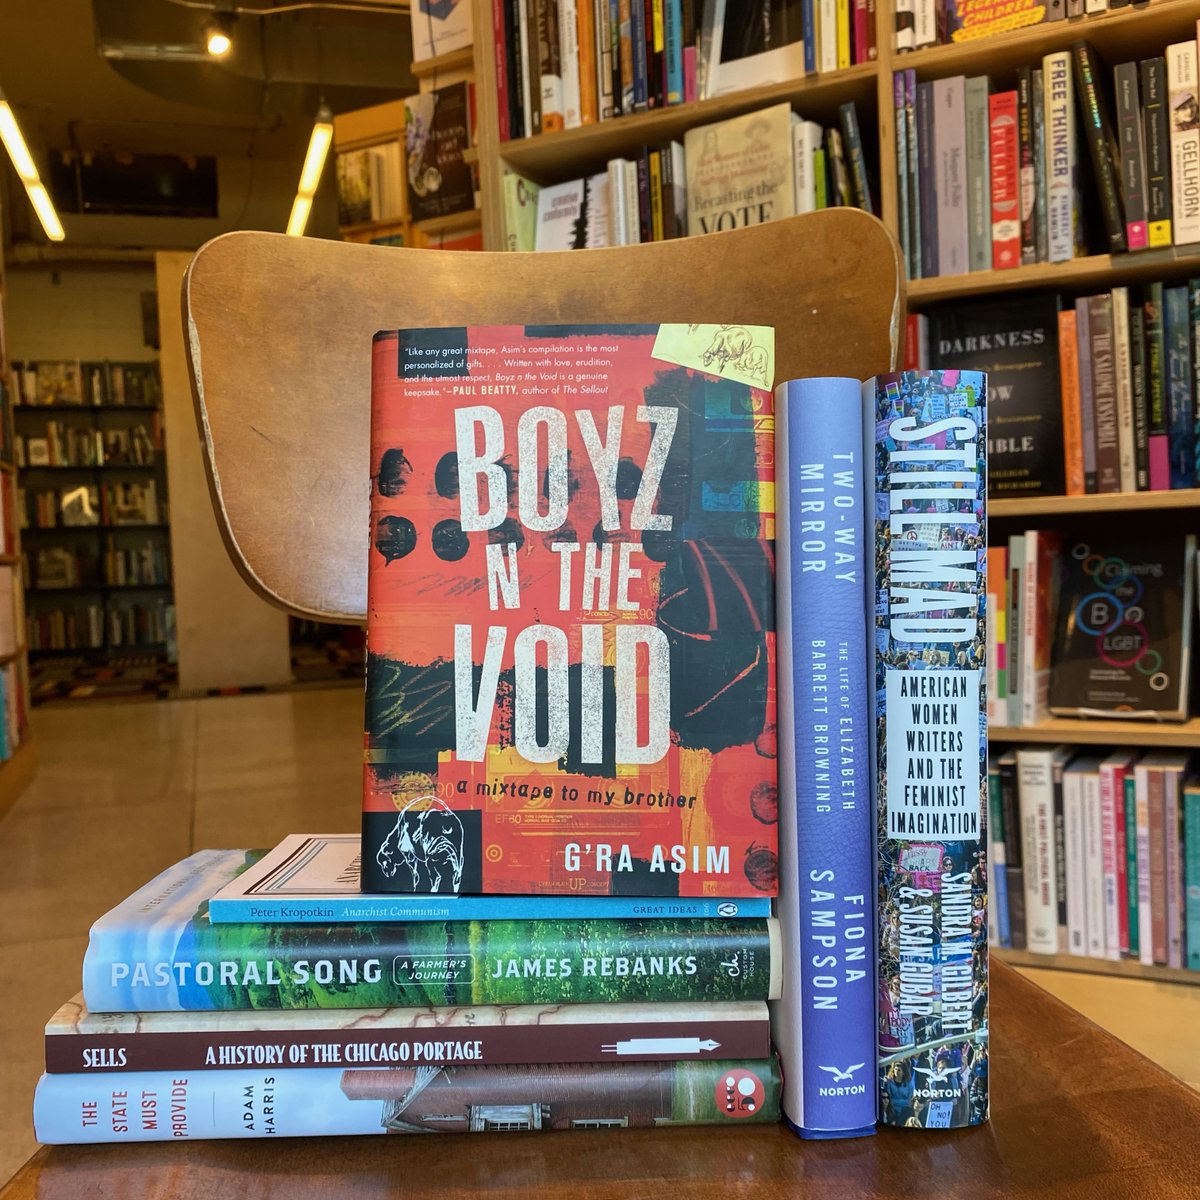 A stack of seven books in front of Seminary Co-op shelves. The books are: "Still Mad: American Women Writers And the Feminist Imagination," "Two-Way Mirror: The Life of Elizabeth Barrett Browning," "Boyz in the Void," "Anarchist Communism: Everywhere You will Find That the Wealth of the Wealth Springs From the Poverty of the Poor." "Pastoral Song," "A History of The Chicago Portage," & "The State Must Provide"